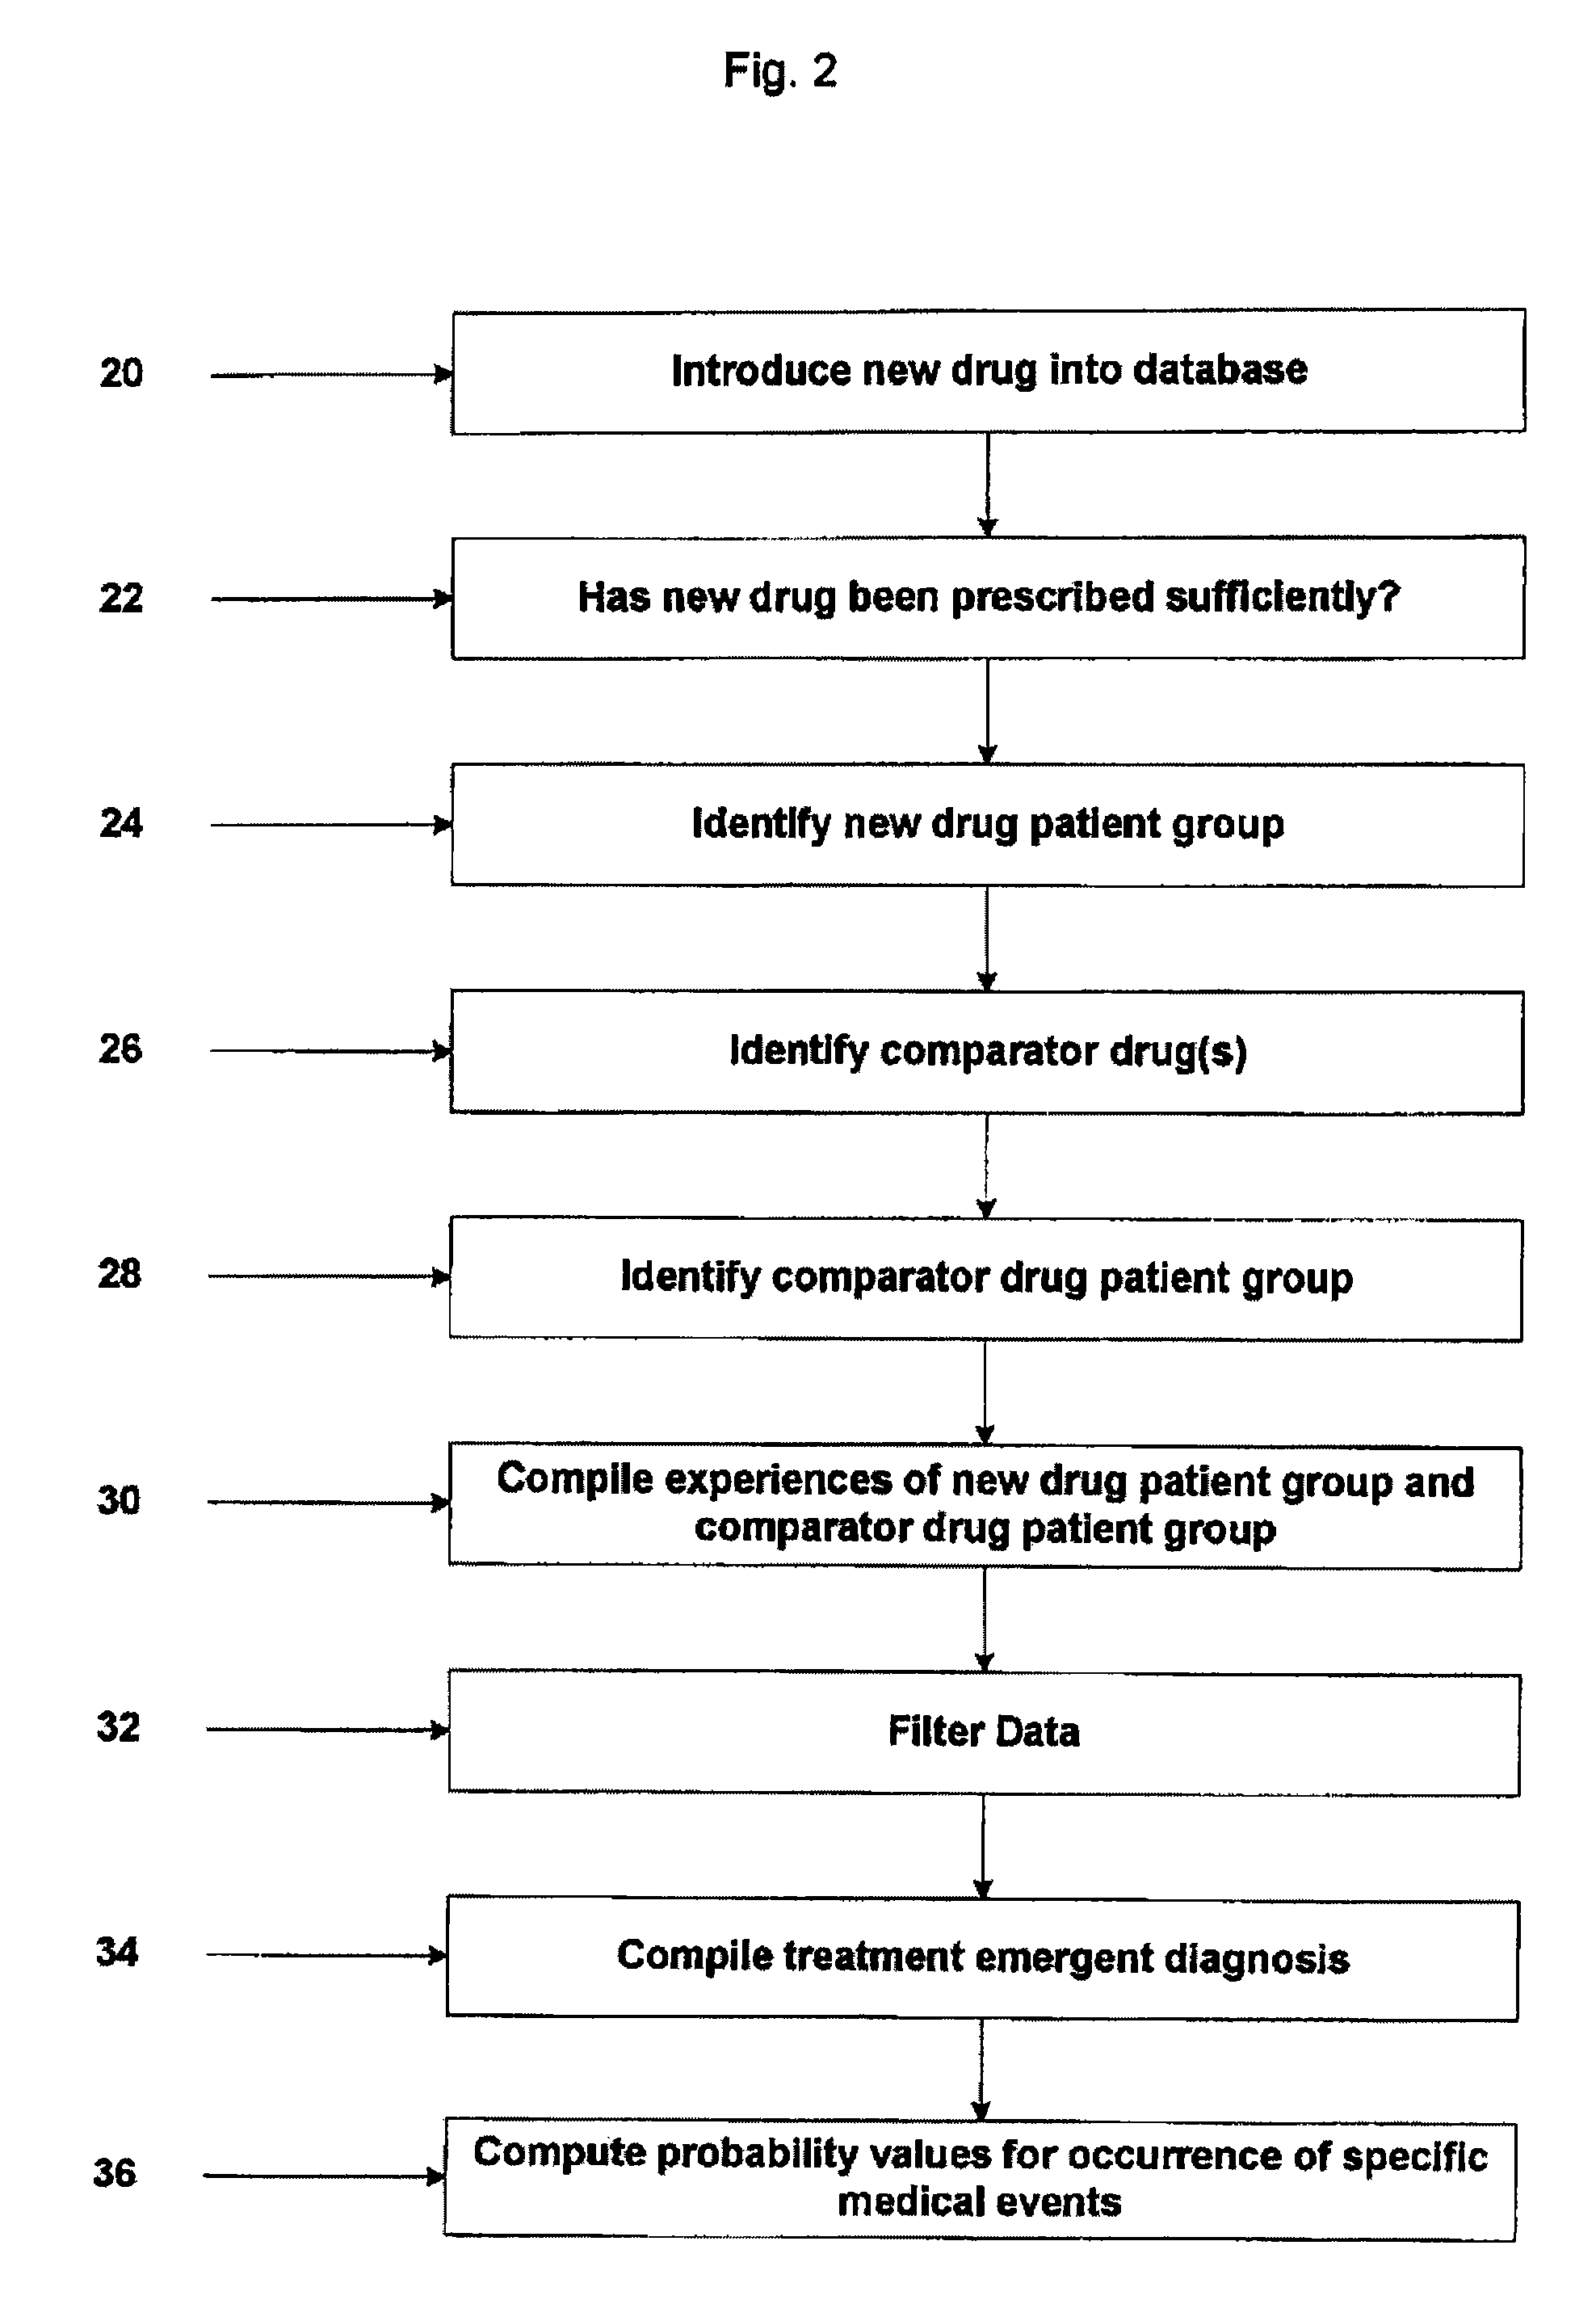 System and method for early identification of safety concerns of new drugs